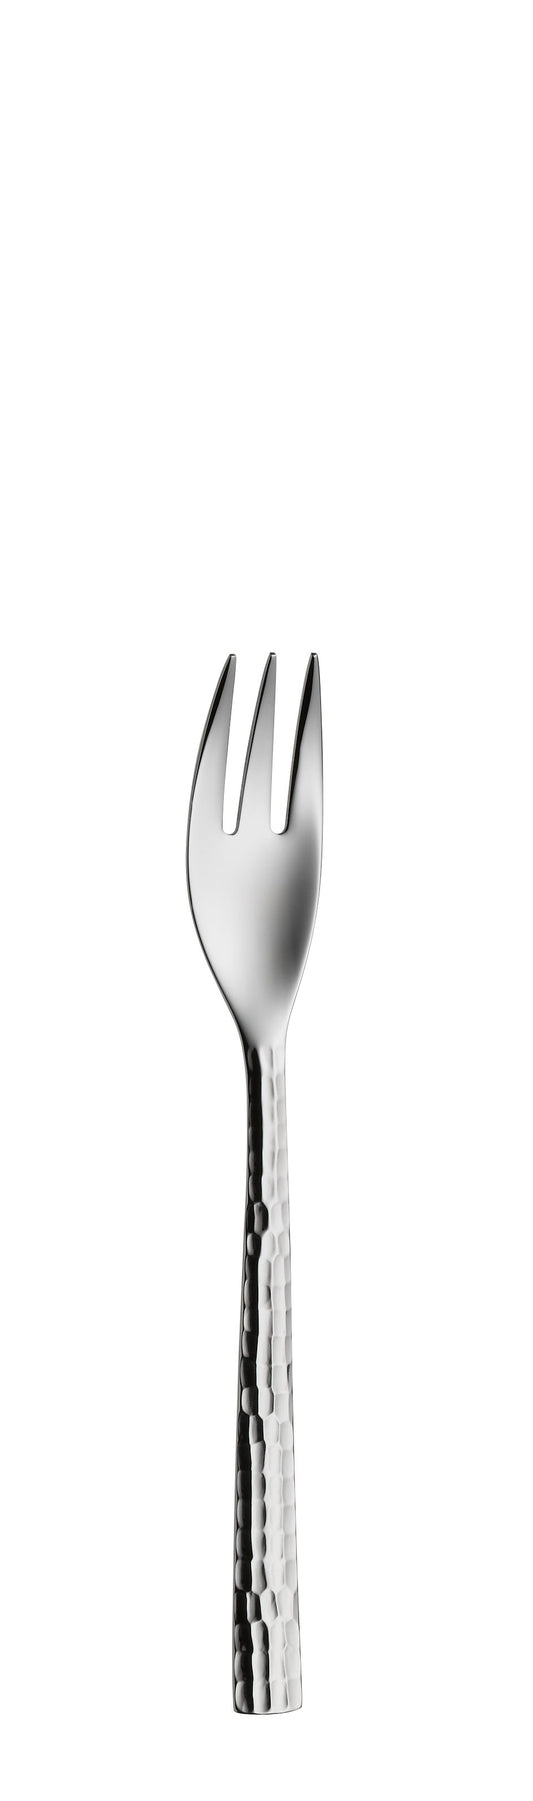 Cake fork 3 prongs LENISTA silver plated 158mm